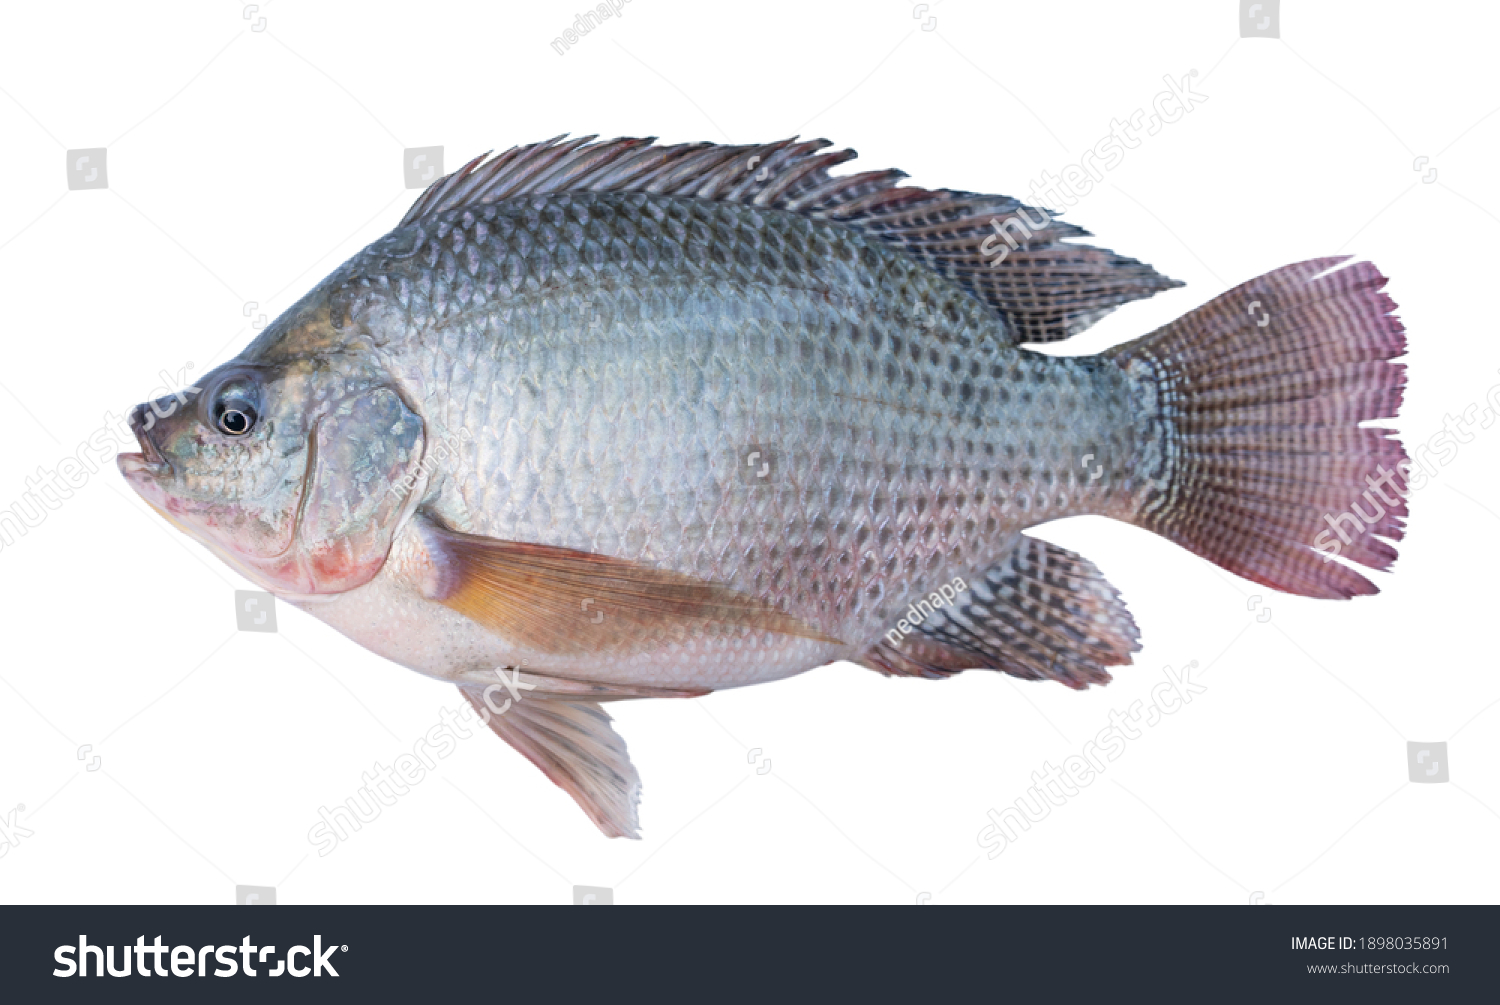 Nile tilapia fish isolated on white background with clipping path. #1898035891